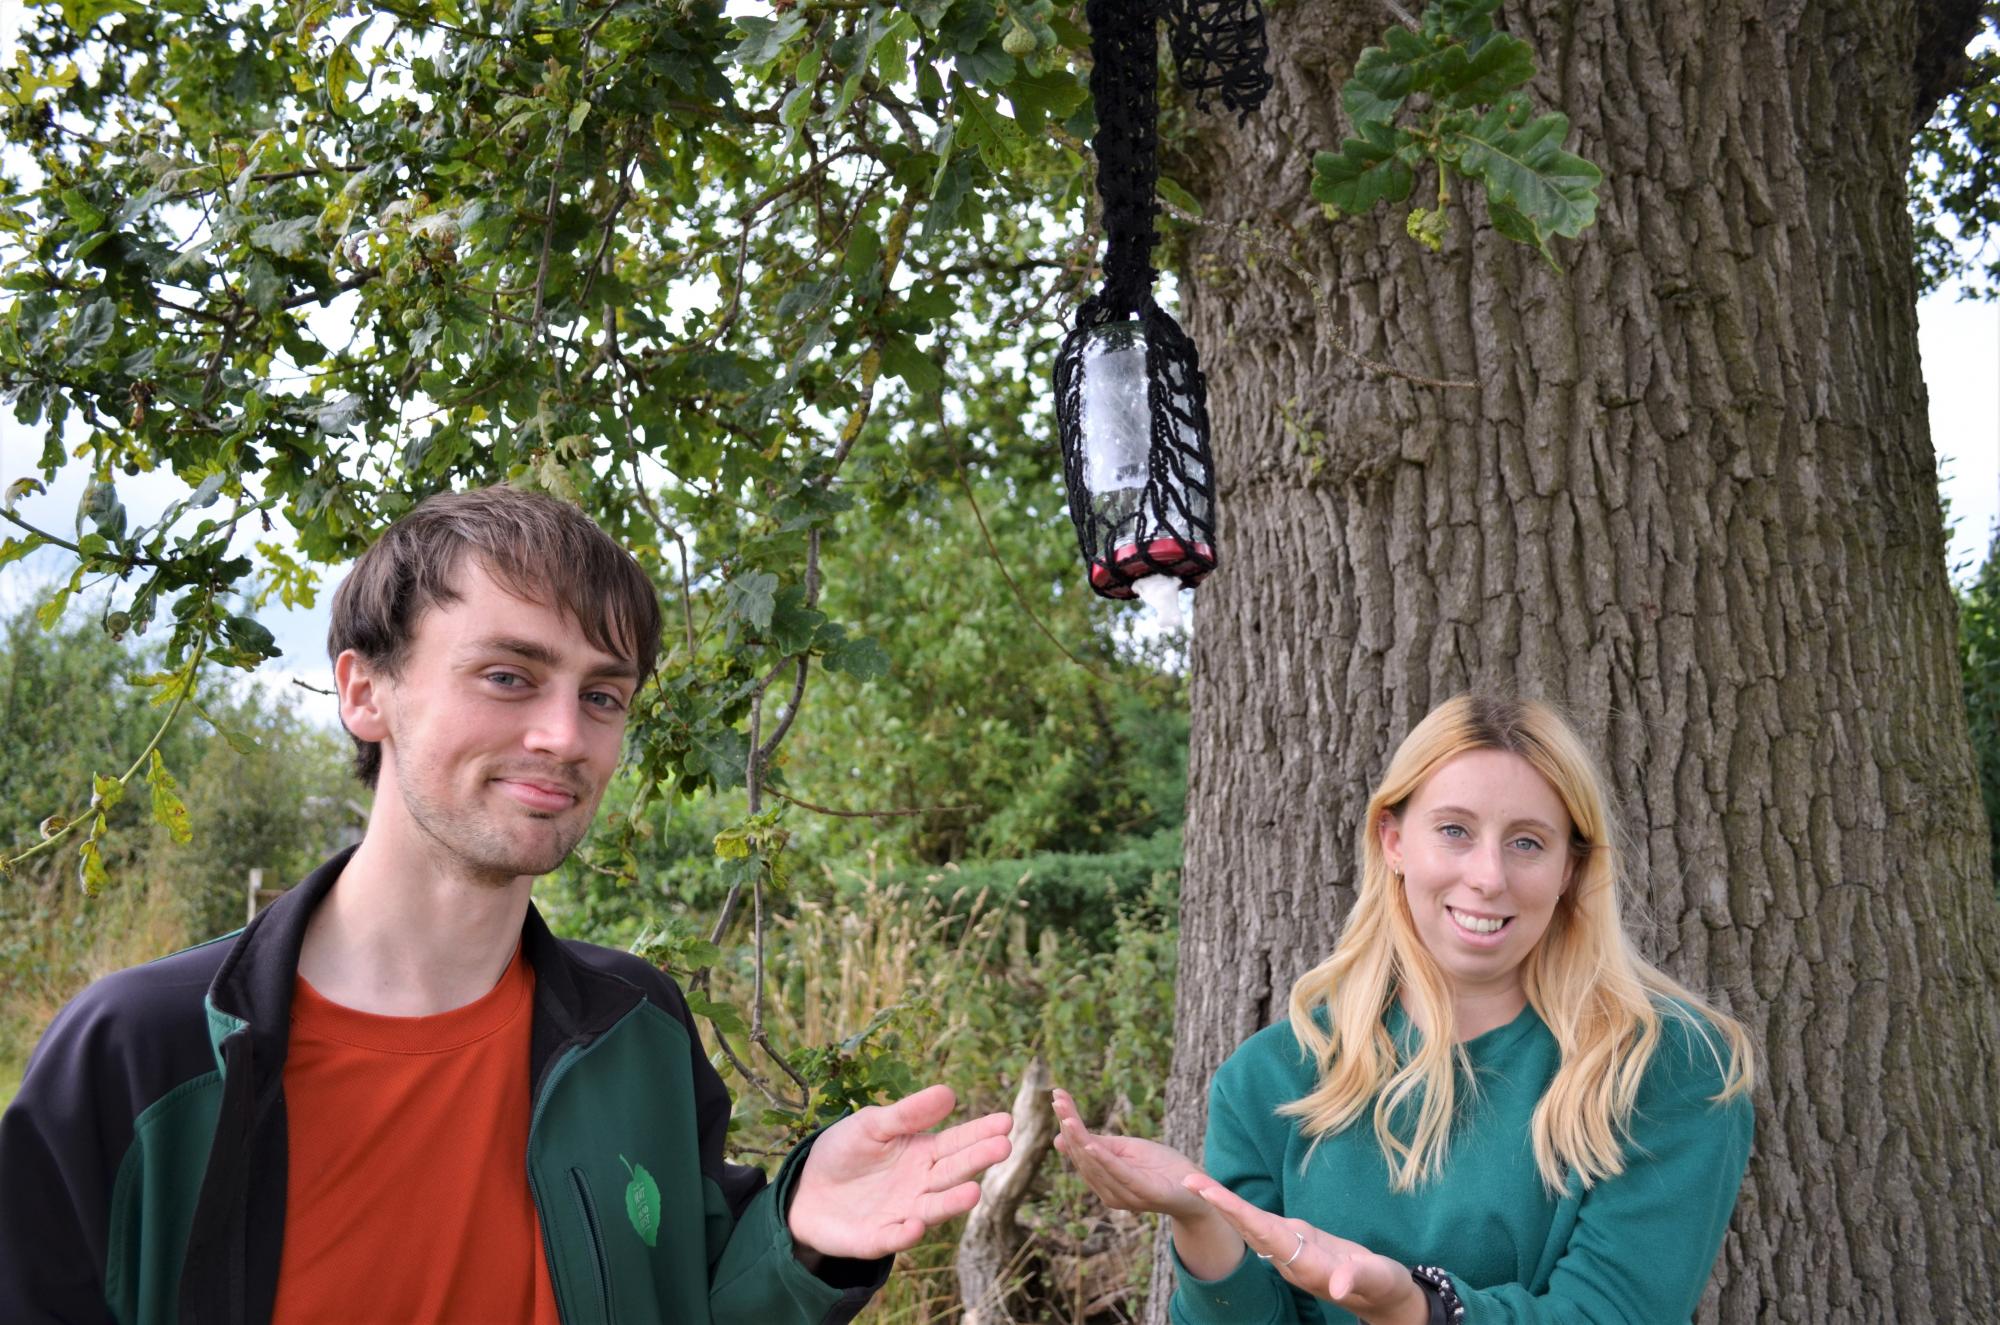 Sam and Ellie with their homemade jar butterfly feeder